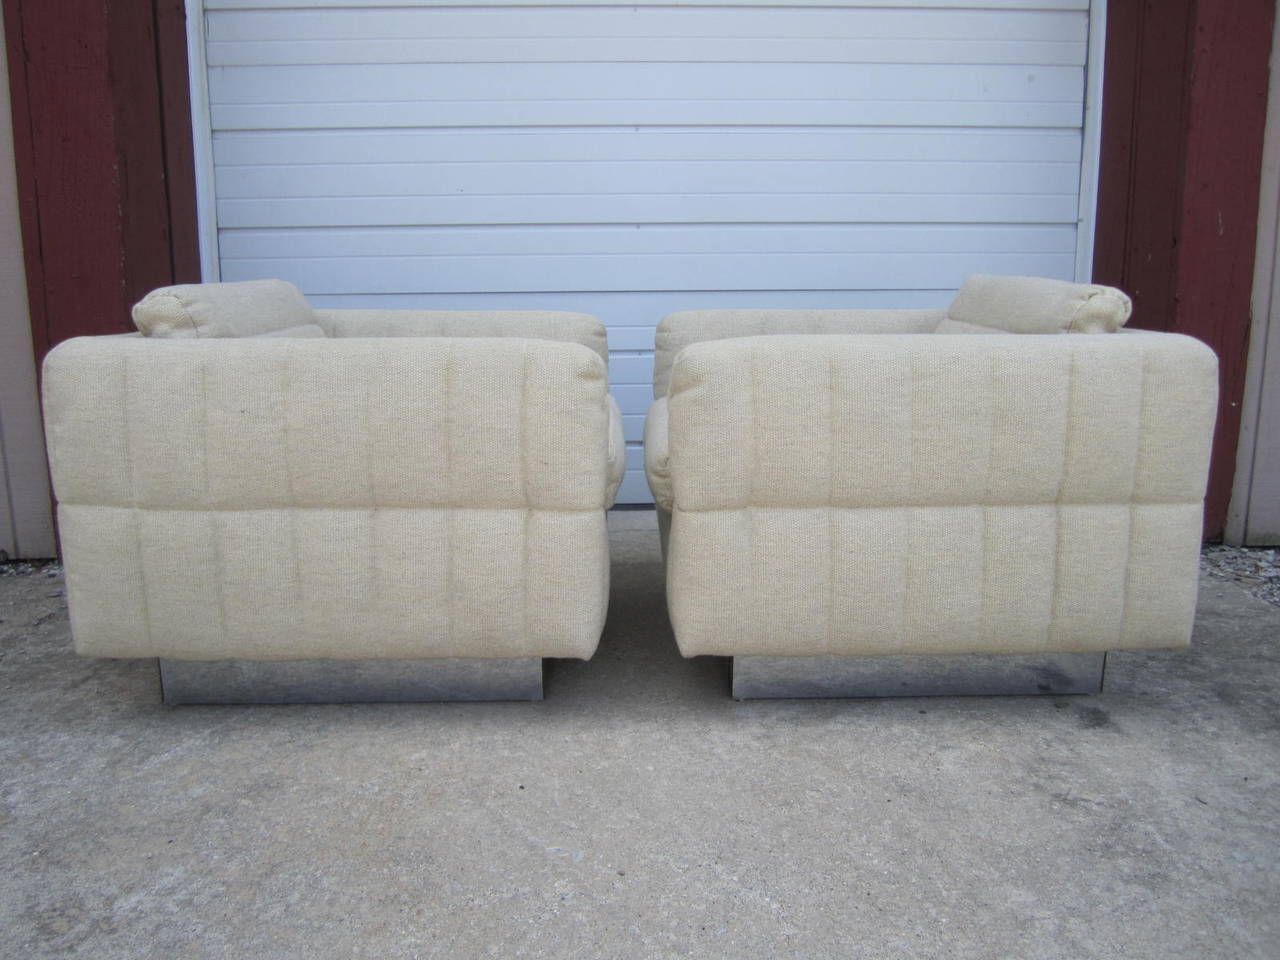 Lovely Pair of Channel Tufted Milo Baughman Cube Chairs Chrome Base Mid-Century In Good Condition For Sale In Pemberton, NJ